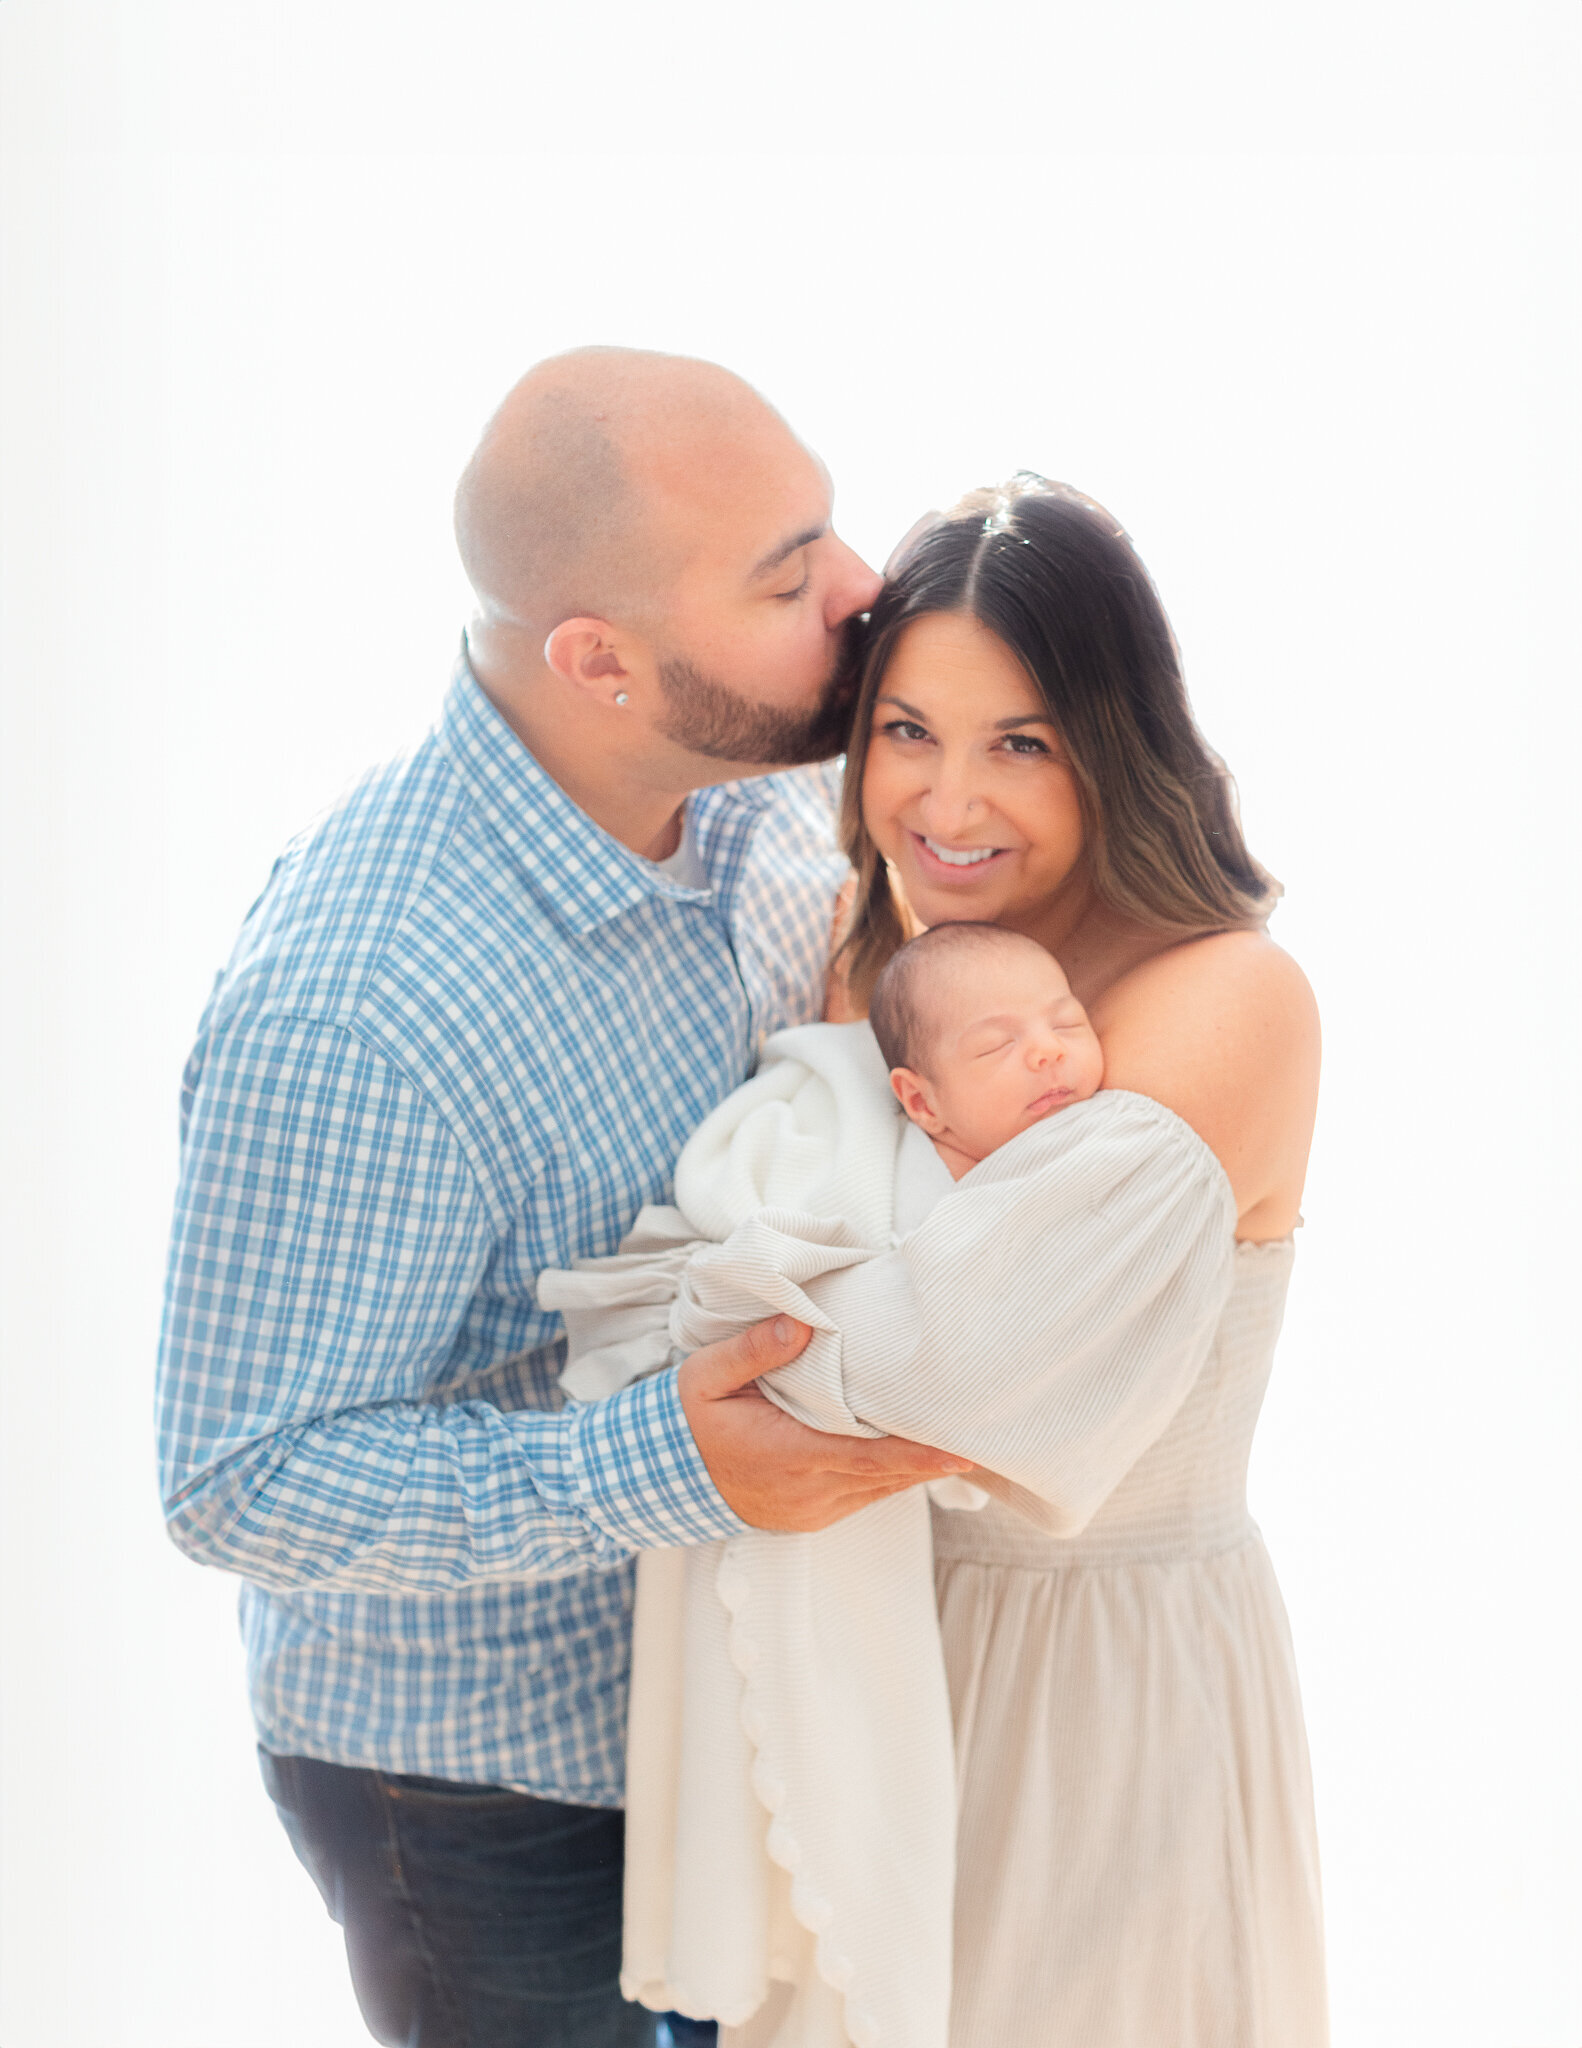 mom wearing dress smiles at camera holding newborn baby while dad kisses her head during massachusetts newborn photo session